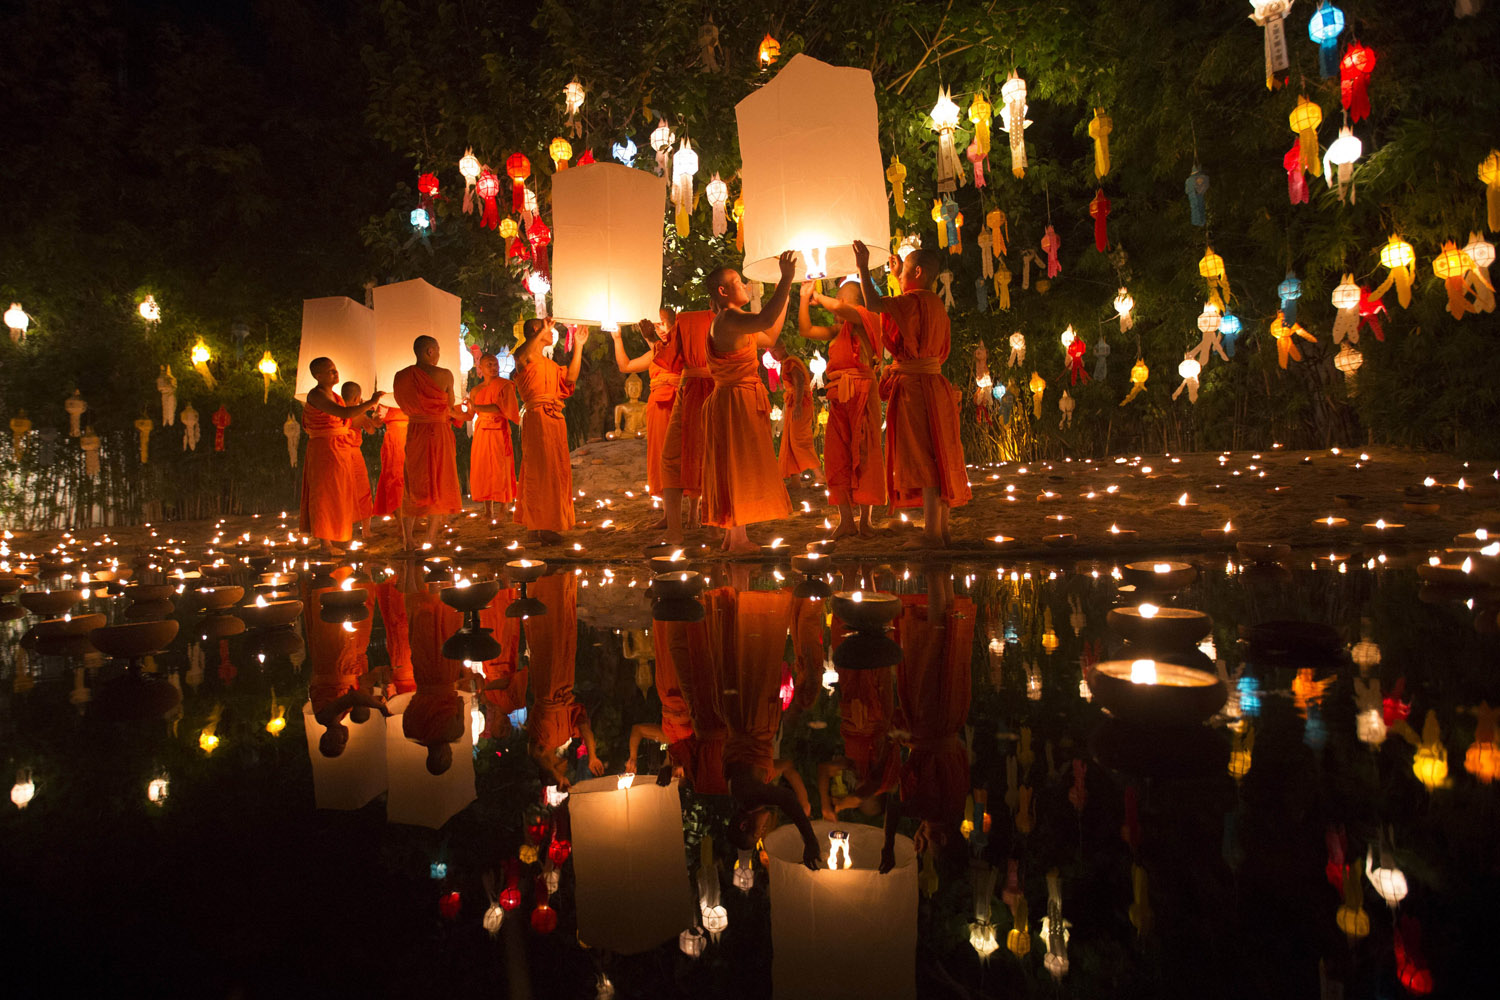 Nov. 17, 2013. Buddhist monks prepare to release sky lantern after a blessing ceremony during the Loy Krathong Festival at a temple in Chiang Mai, Thailand.